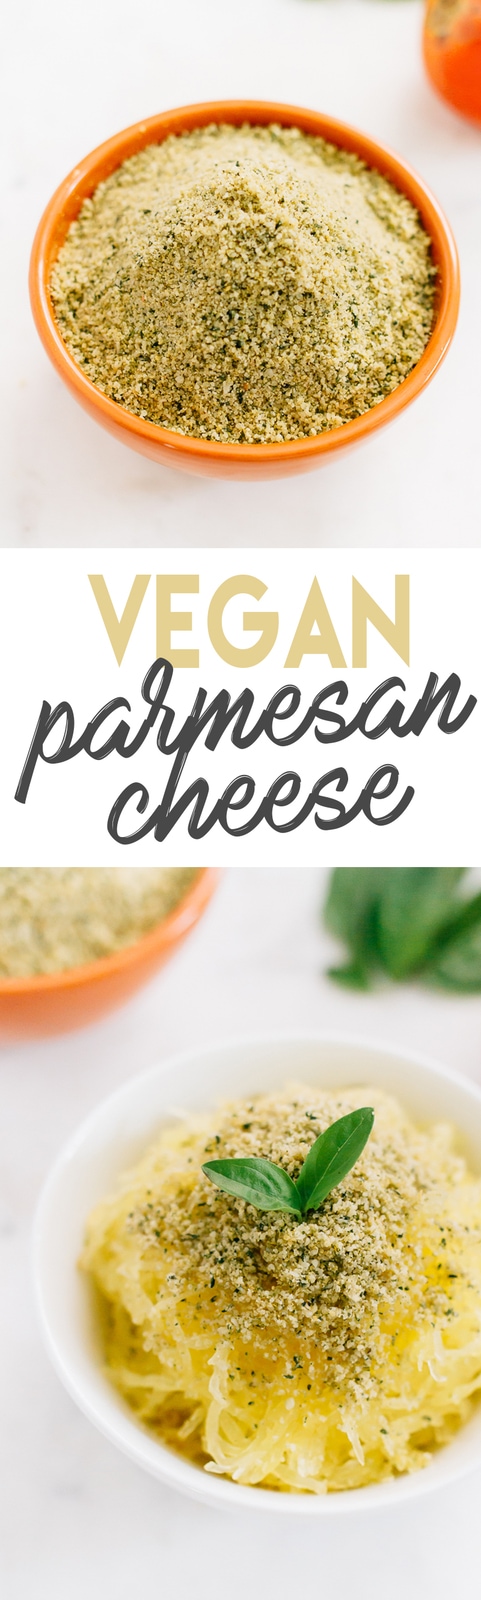 Make your own vegan parmesan cheese with hemp seeds. It’s the perfect cheesy topping for pizza, pasta, veggies, salads, popcorn and more. 